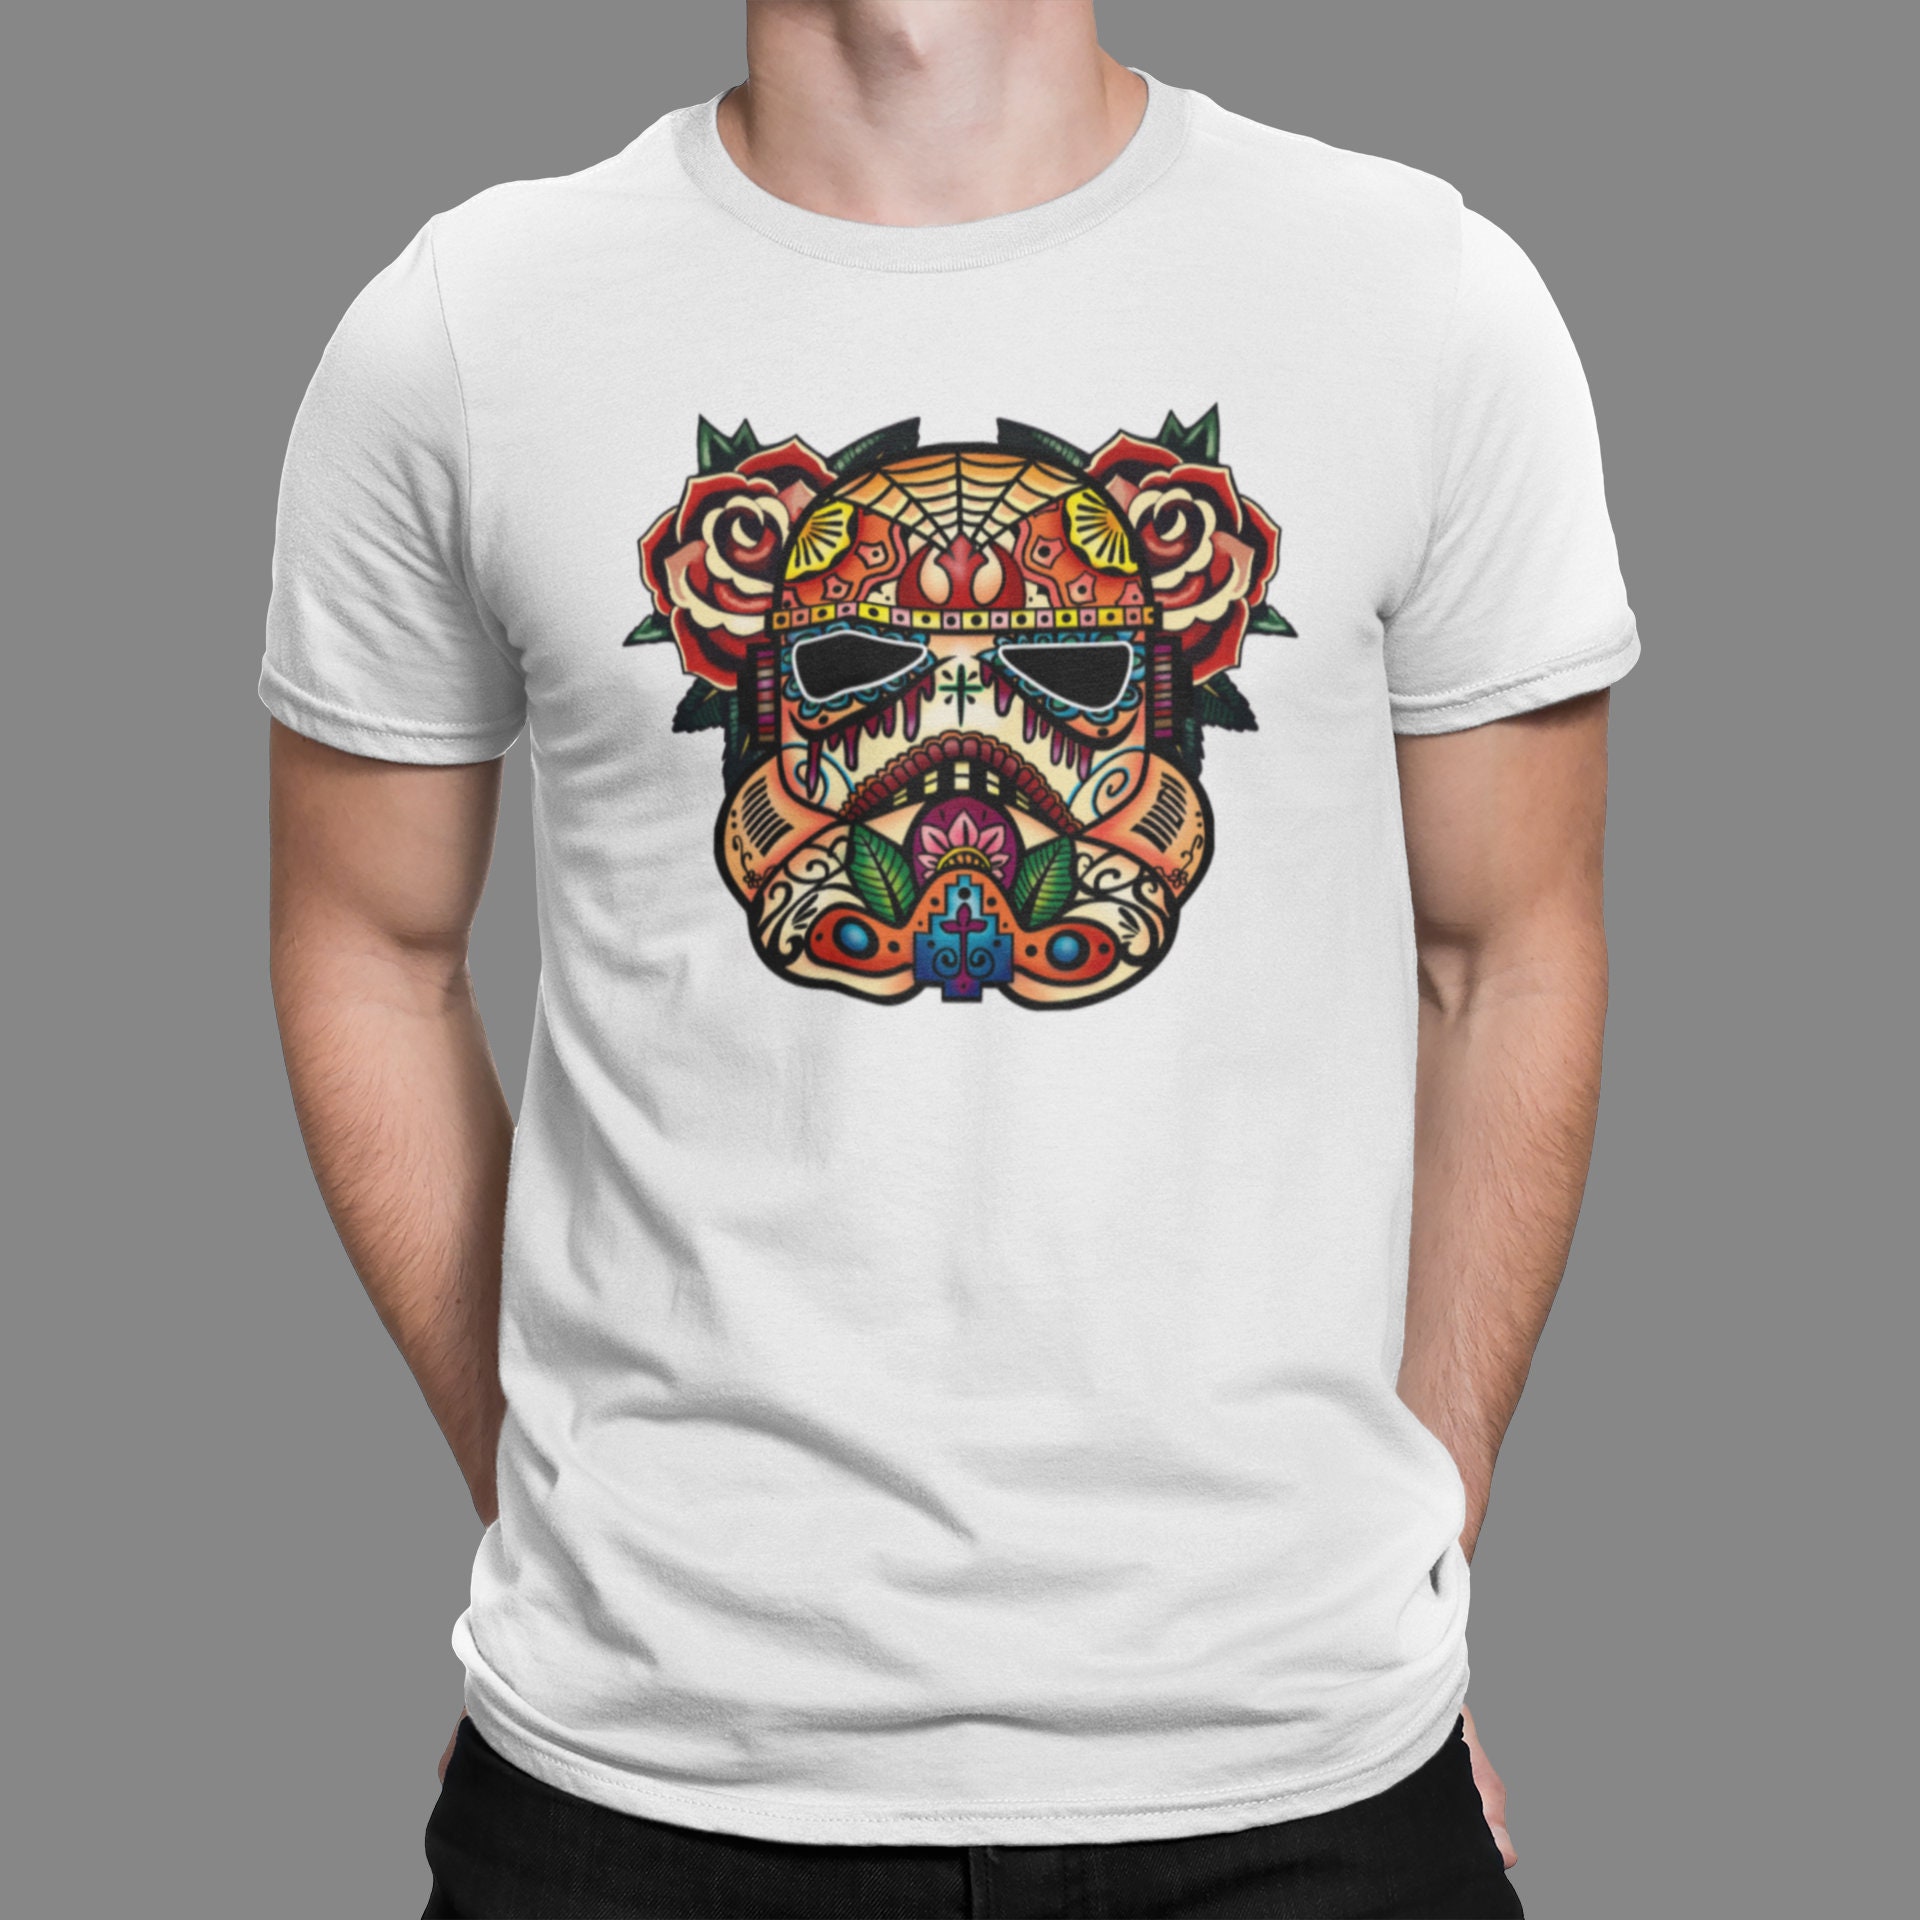 Storm Trooper Star Wars Inspired Day of The DeadDia De Los Muertos Sugarskull Short-Sleeve Small Youth Size T-Shirt